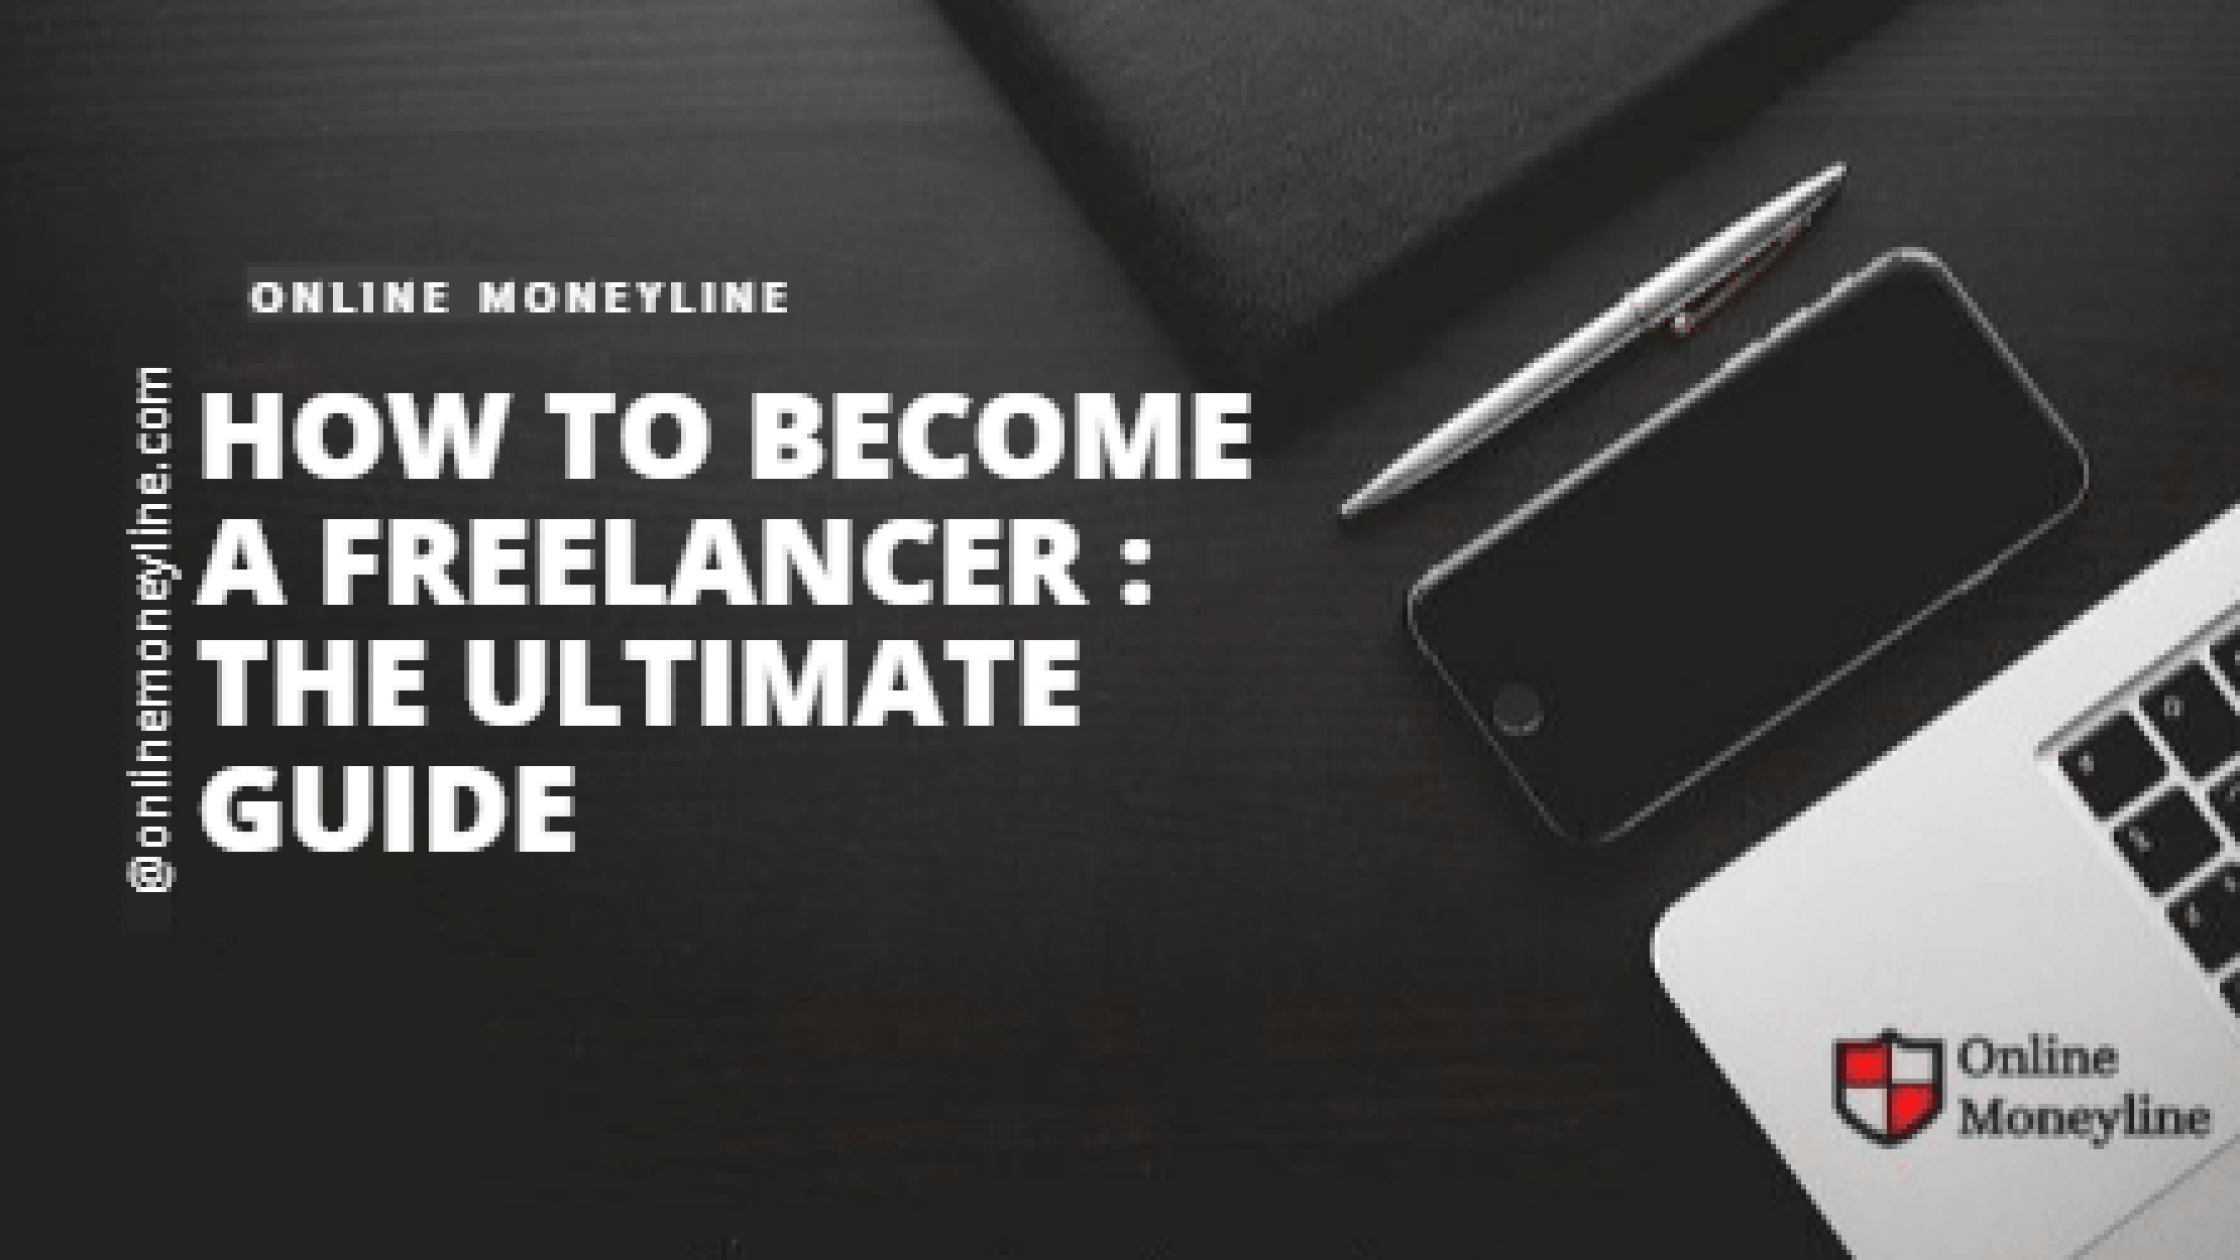 How To Become a Freelancer:The Ultimate Guide